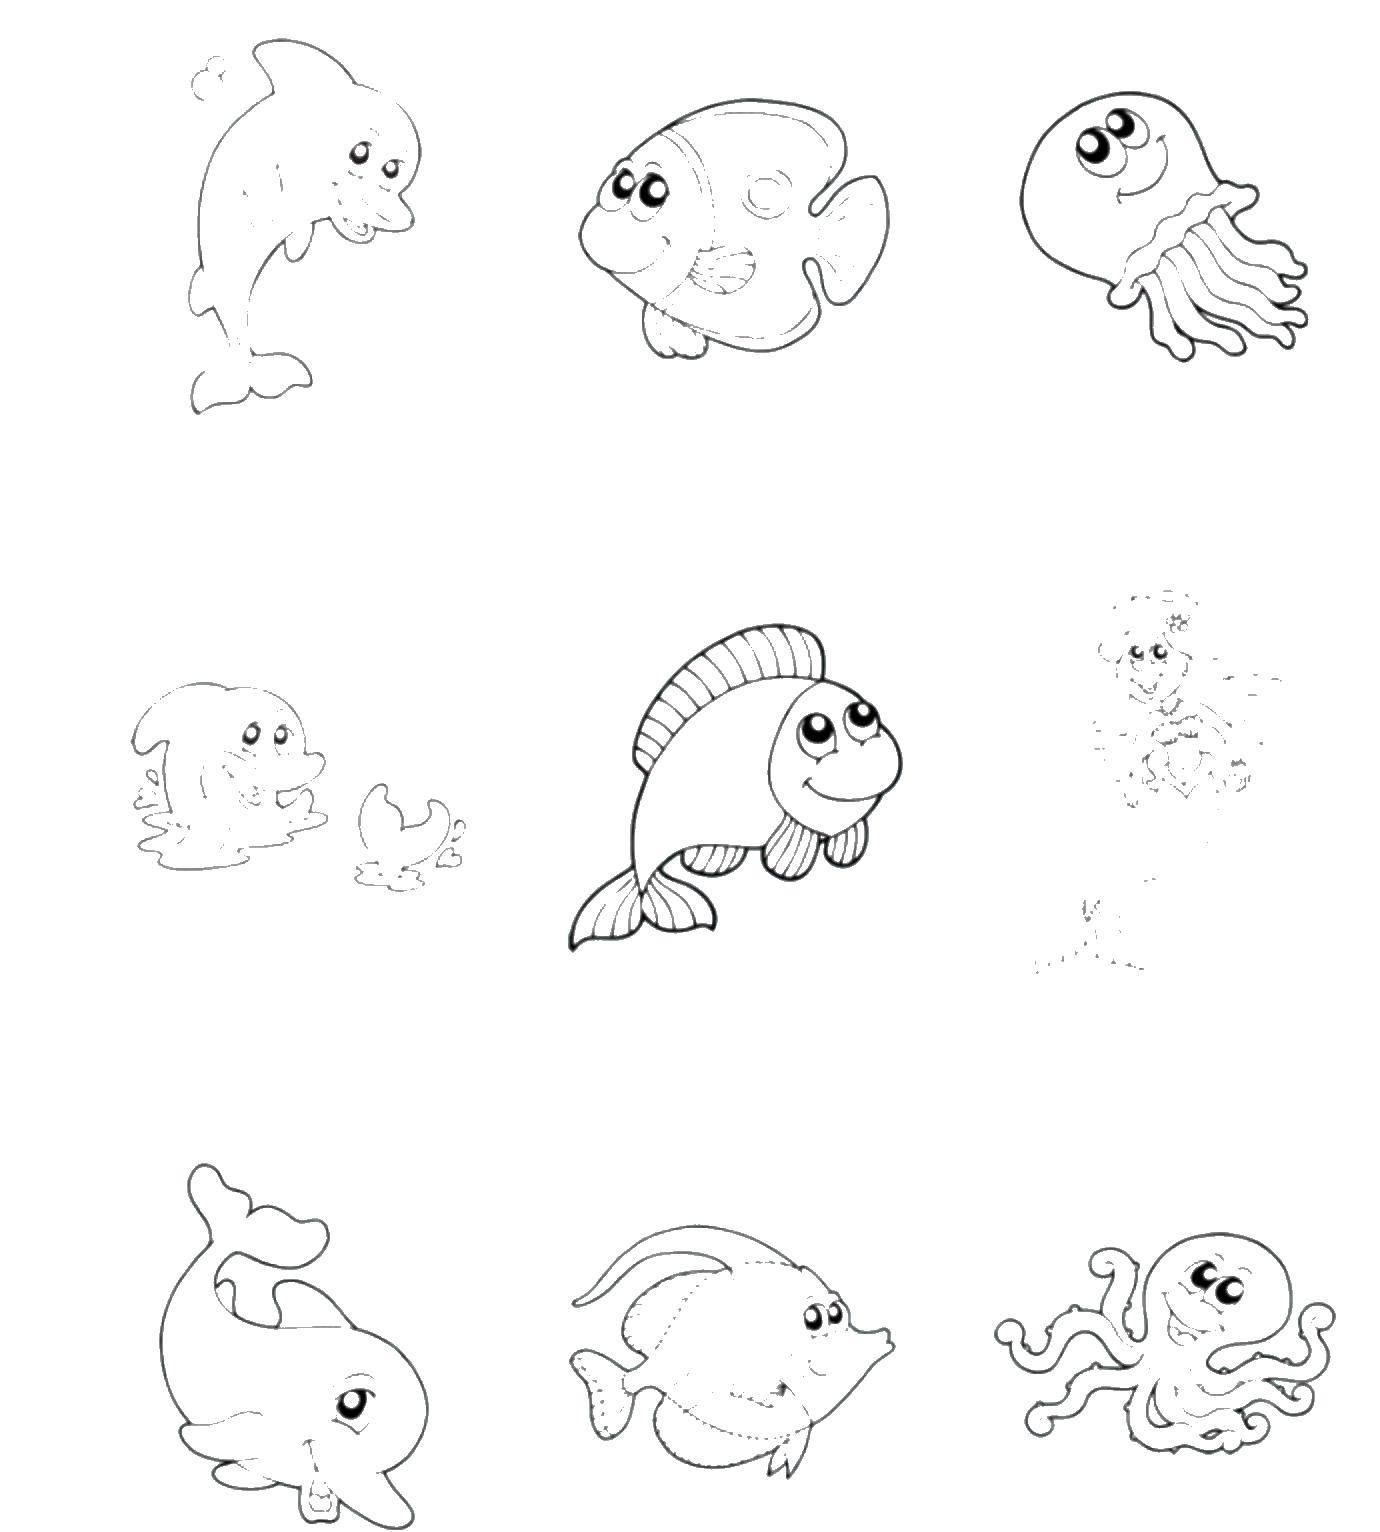 Coloring The contours of sea creatures. Category Marine animals. Tags:  jellyfish, fish, Dolphin, octopus.